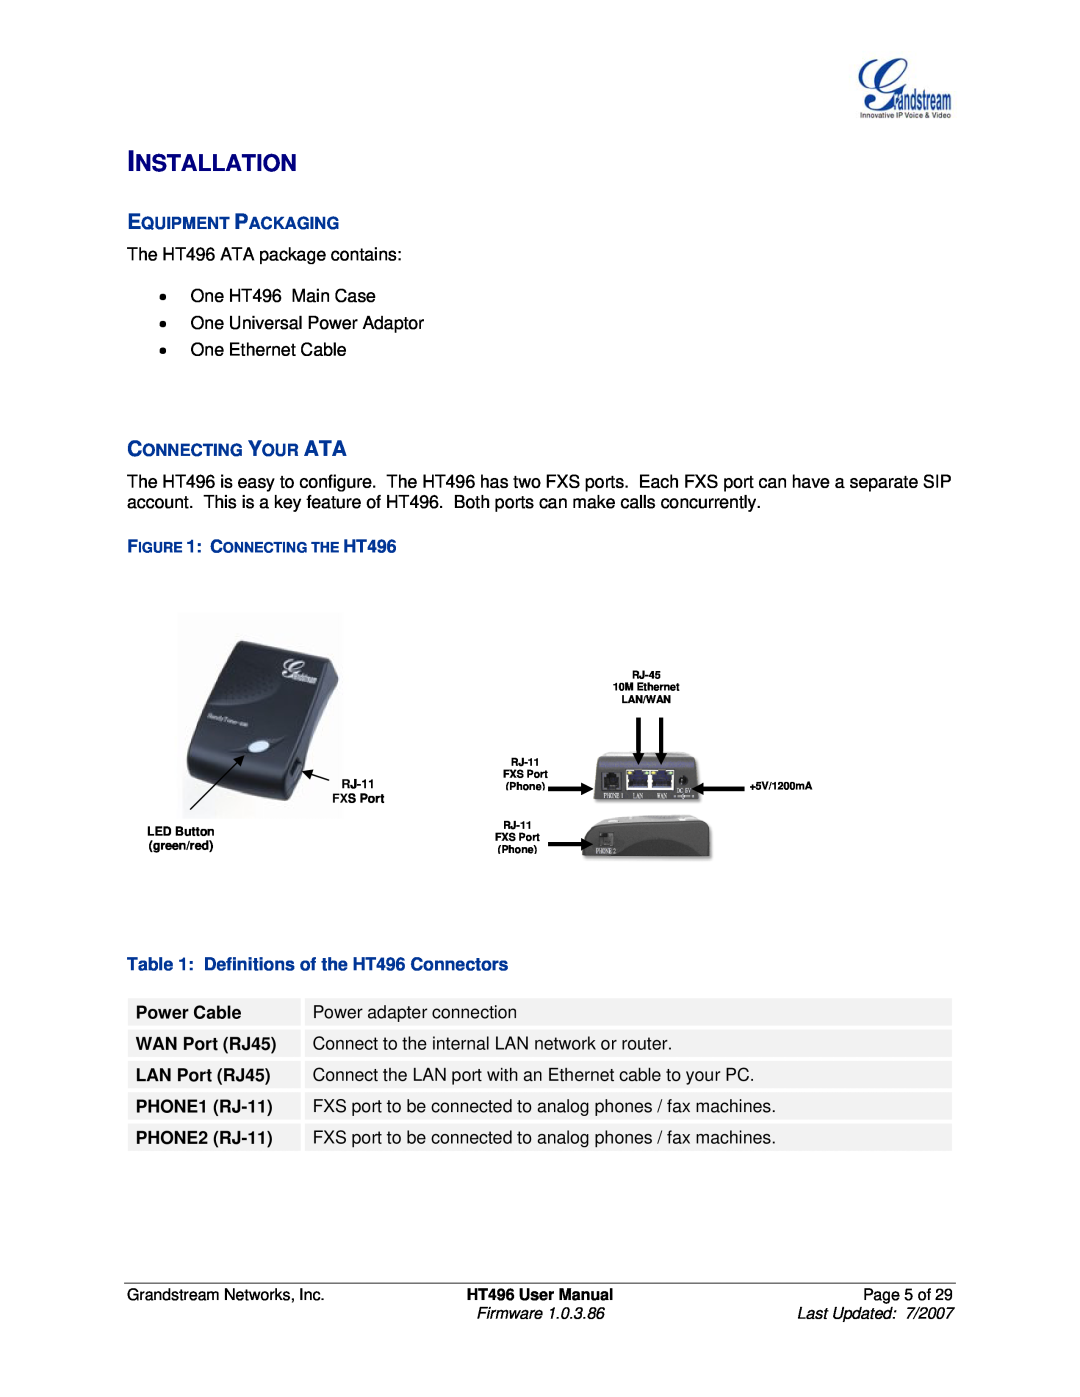 Grandstream Networks Installation, Equipment Packaging, Connecting Your Ata, Definitions of the HT496 Connectors 